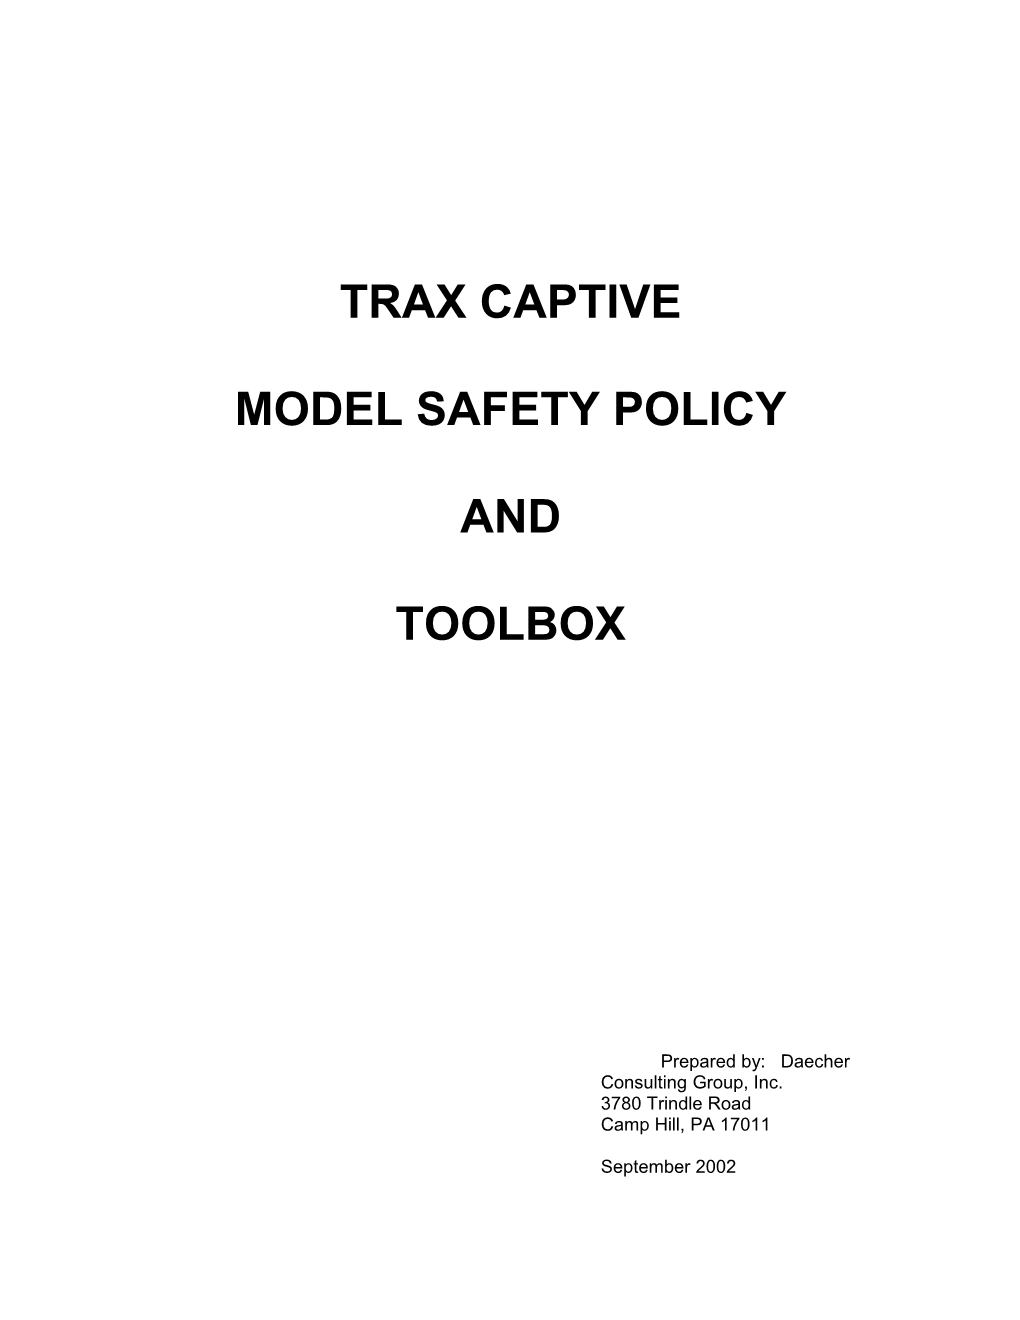 Model Safety Policy